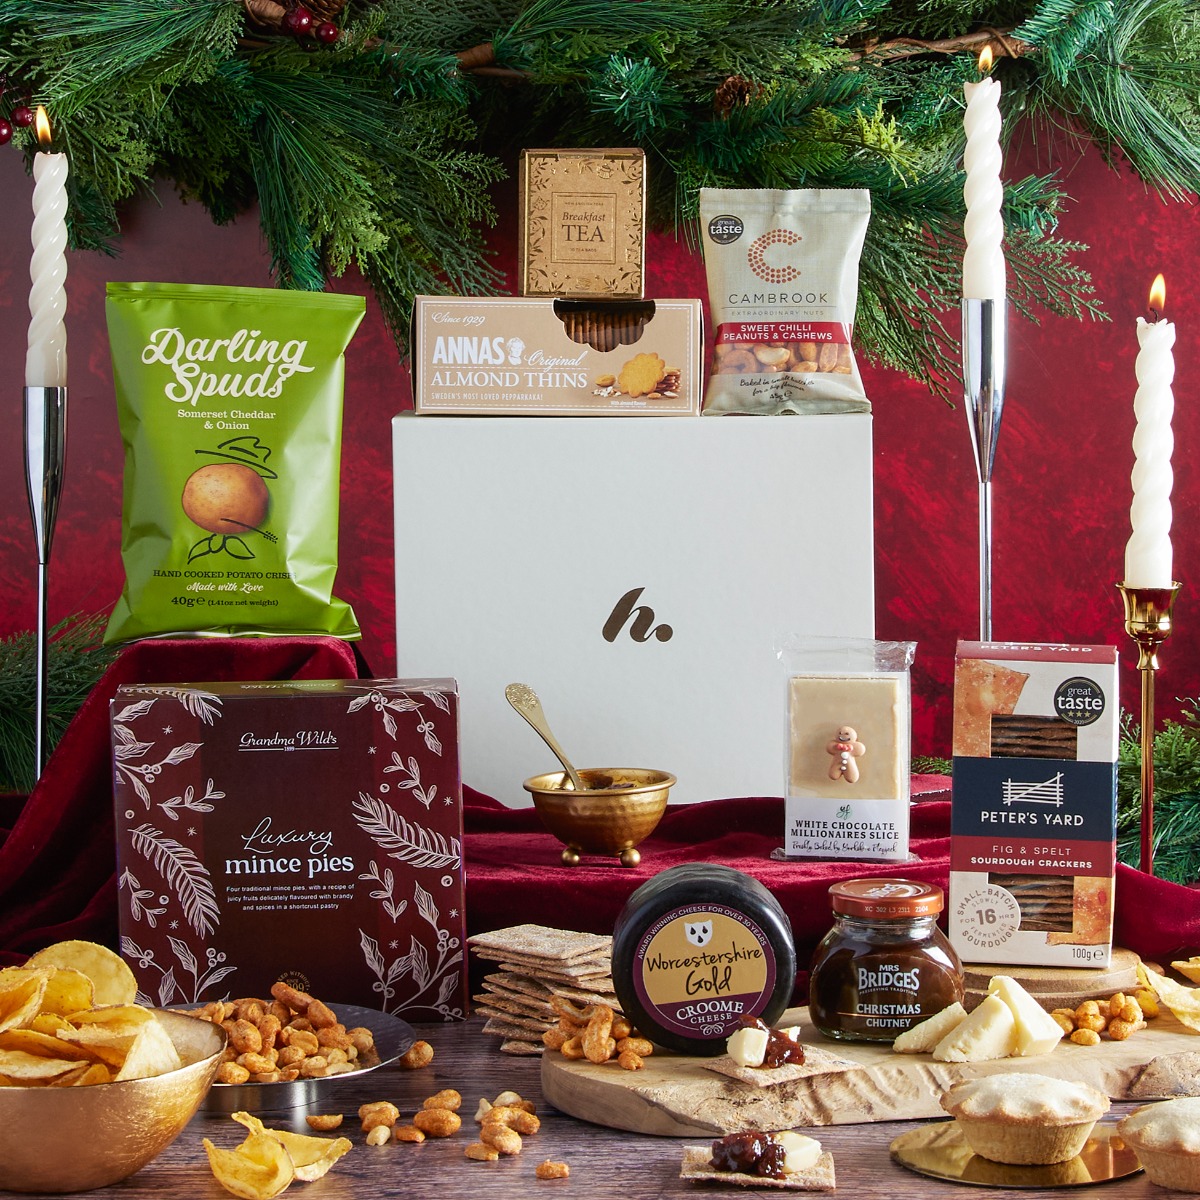 The Christmas Season Selection Gift Box with contents on display as a recommended Christmas gifts for mum